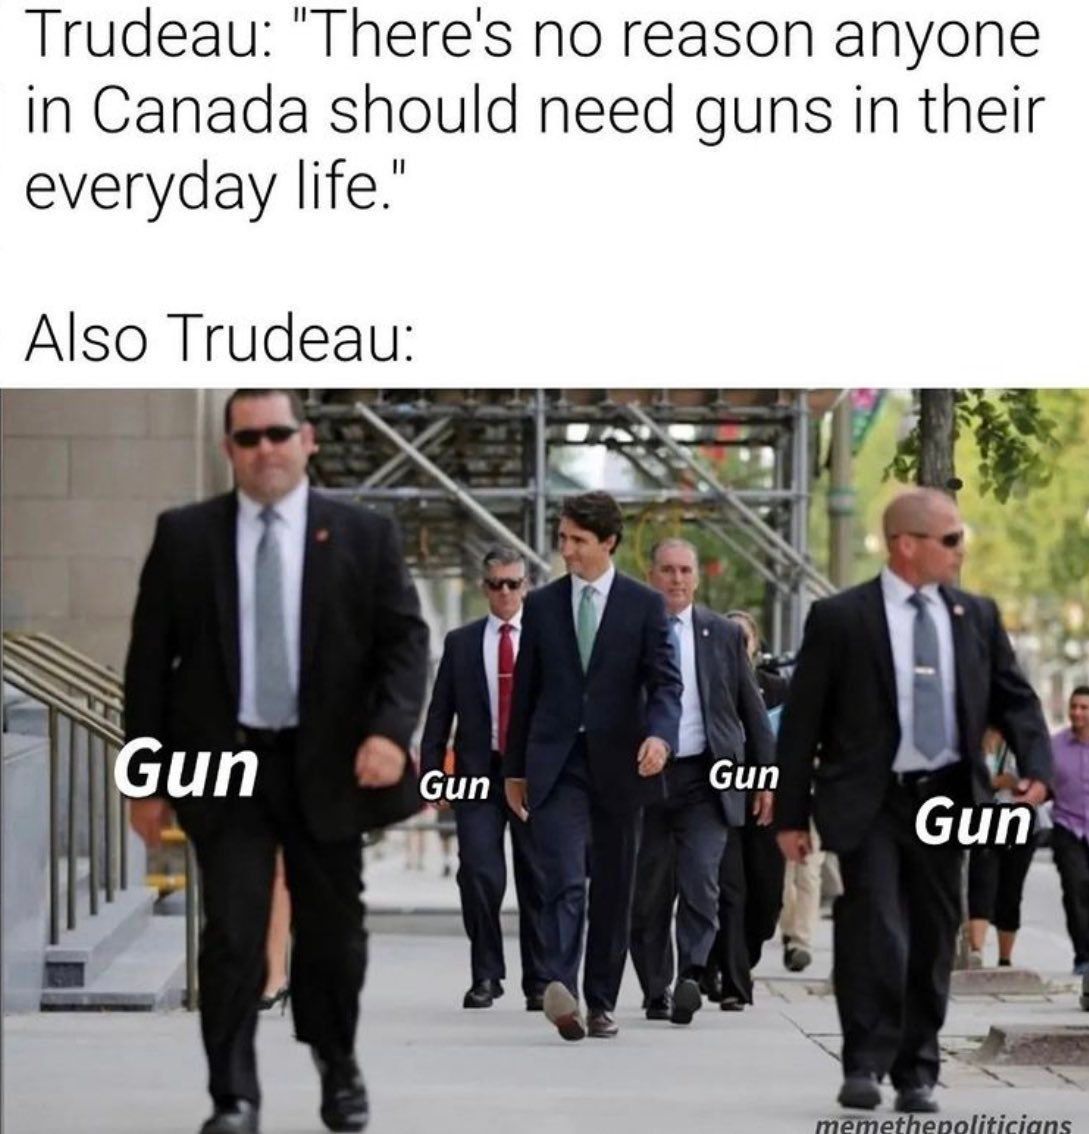 Trudeau (Castro) to freeze all handgun sales in Canada in latest act of WAR against citizens